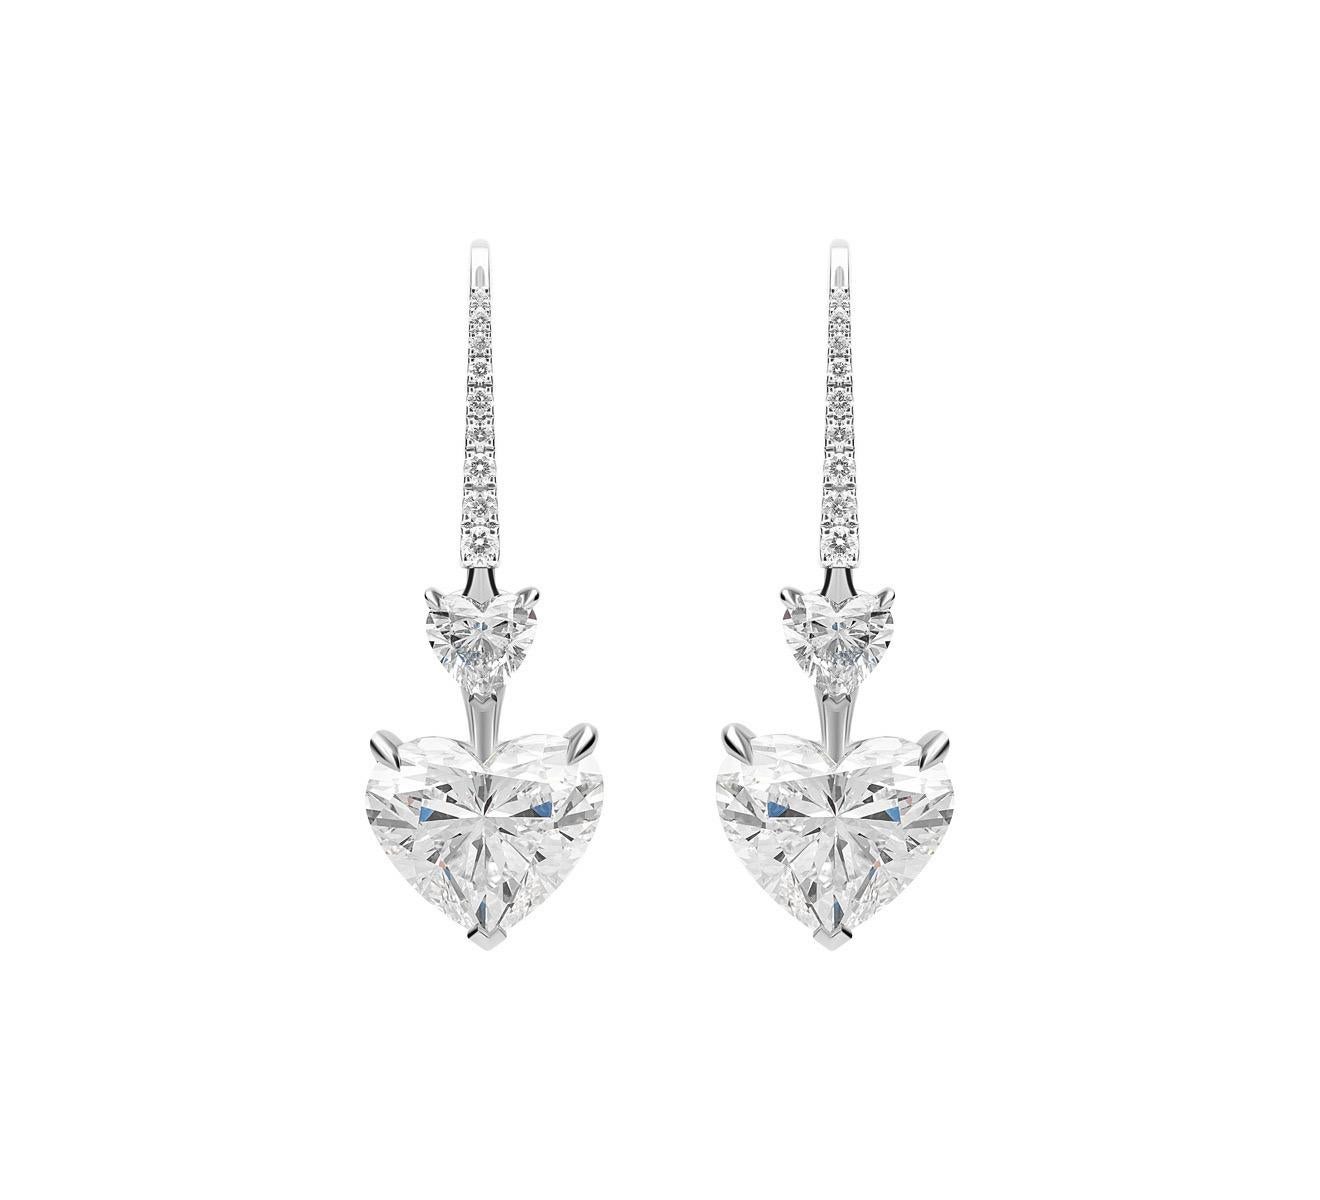 Heart Shape Diamonds each weighing 3.0 carat, suspended from Heart shape Diamonds each weighing 0.50 Carats and embellished with Round Diamonds weighing 0.30 Carats.
Heart shape Diamonds graded as H-I color and SI clarity.
Set in Platinum.